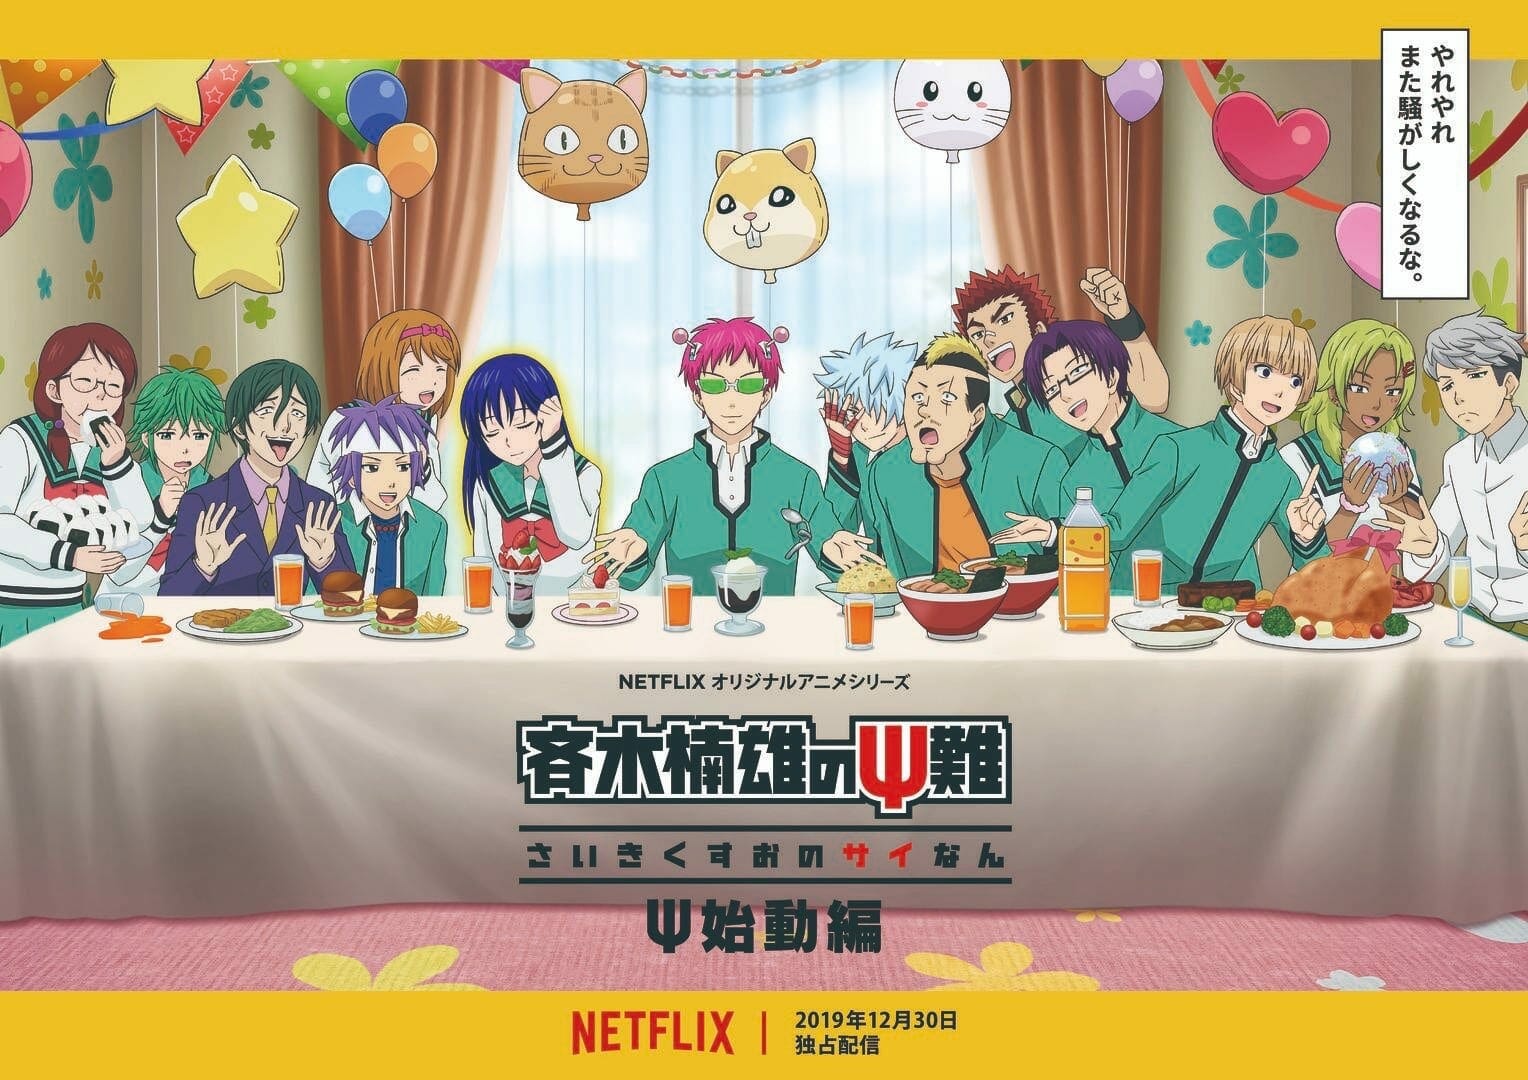 The Last Supper Anime Poster One Punch Man Attack on Titan Full Metal  Alchemist  eBay